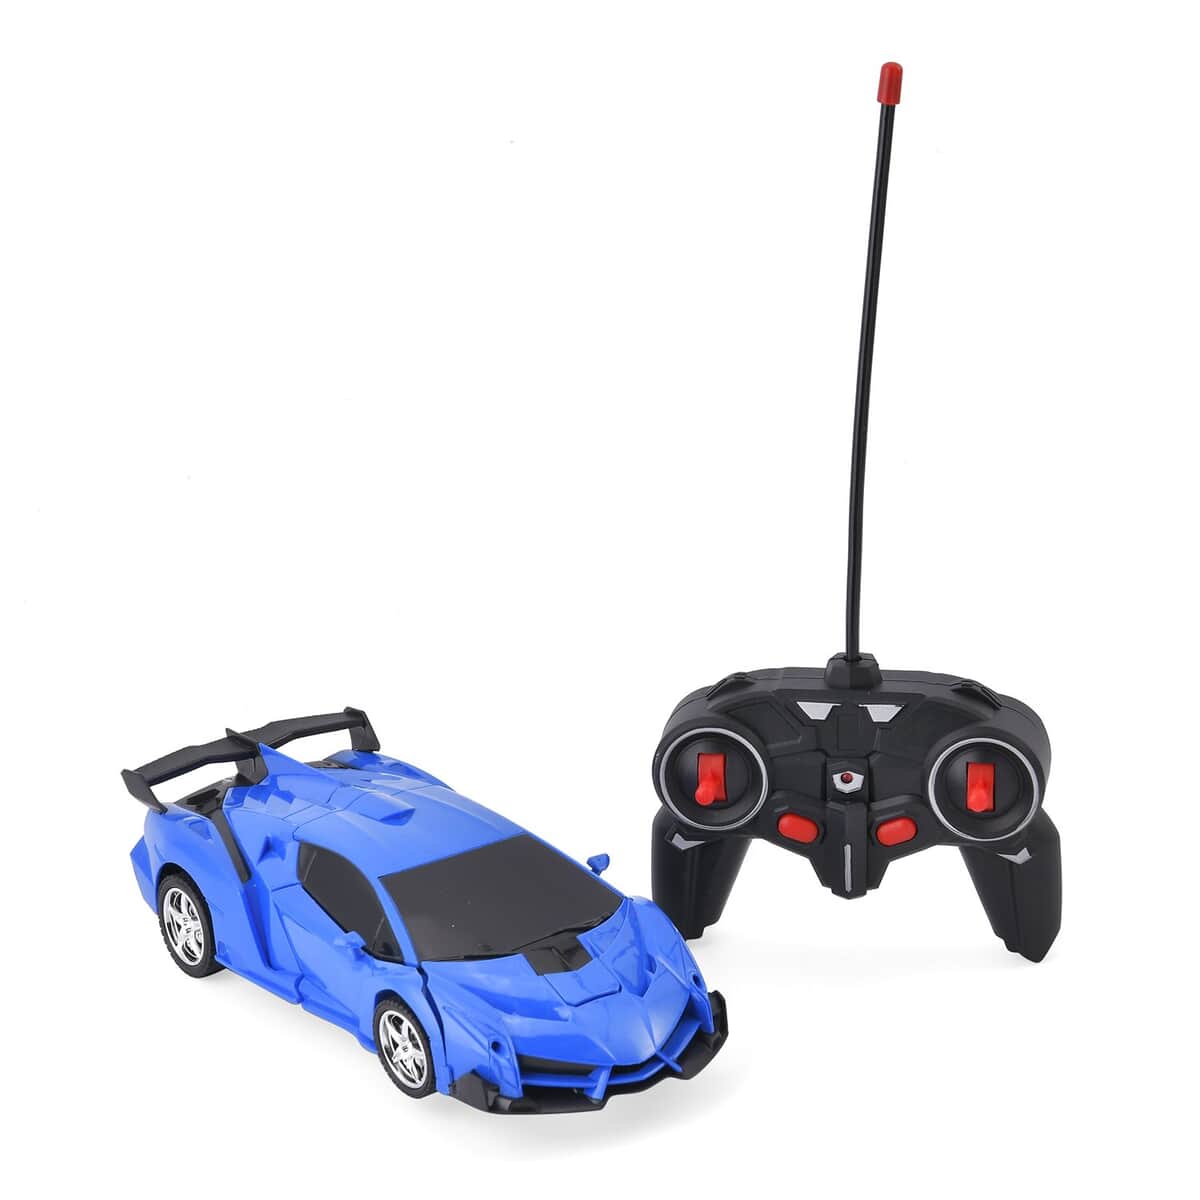 2 in 1 Blue Electric Toy Transform Robot and RC Car 360 Degree Turning Flexibly (Size - Car 23x9x6 cm and Robot: 20x17x15 cm) image number 1